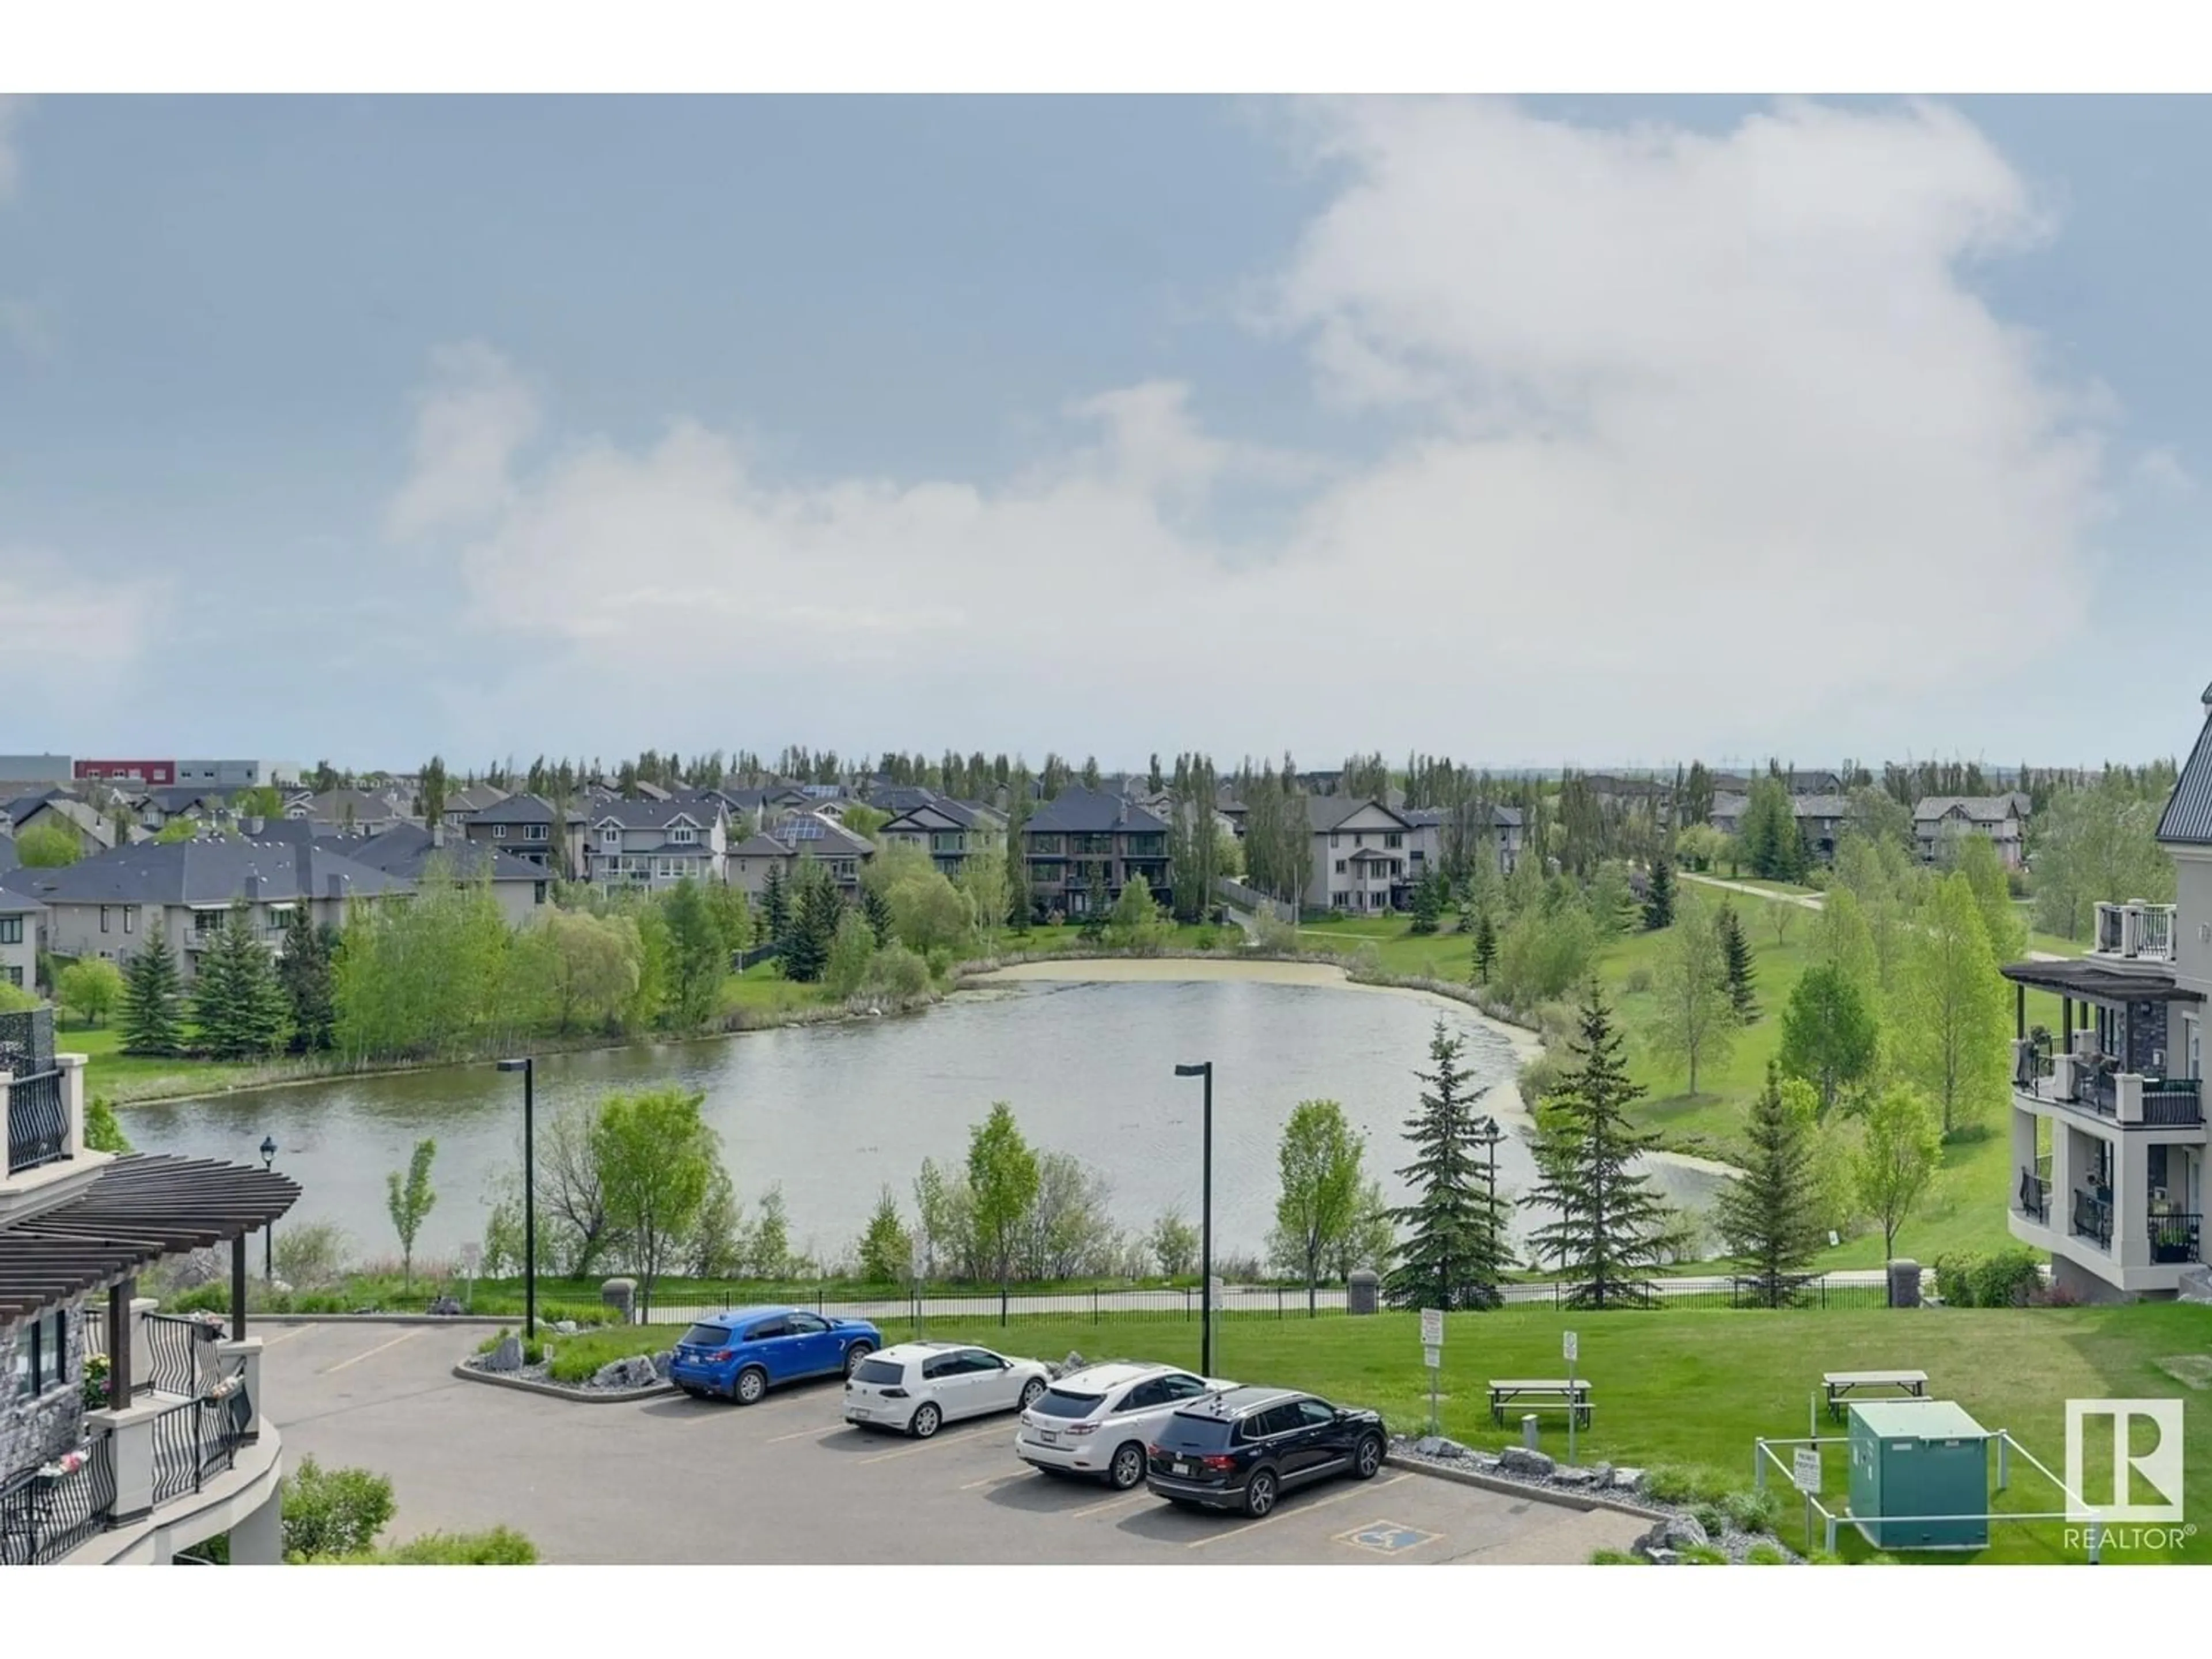 Lakeview for #439 6079 MAYNARD WY NW, Edmonton Alberta T6R0S4